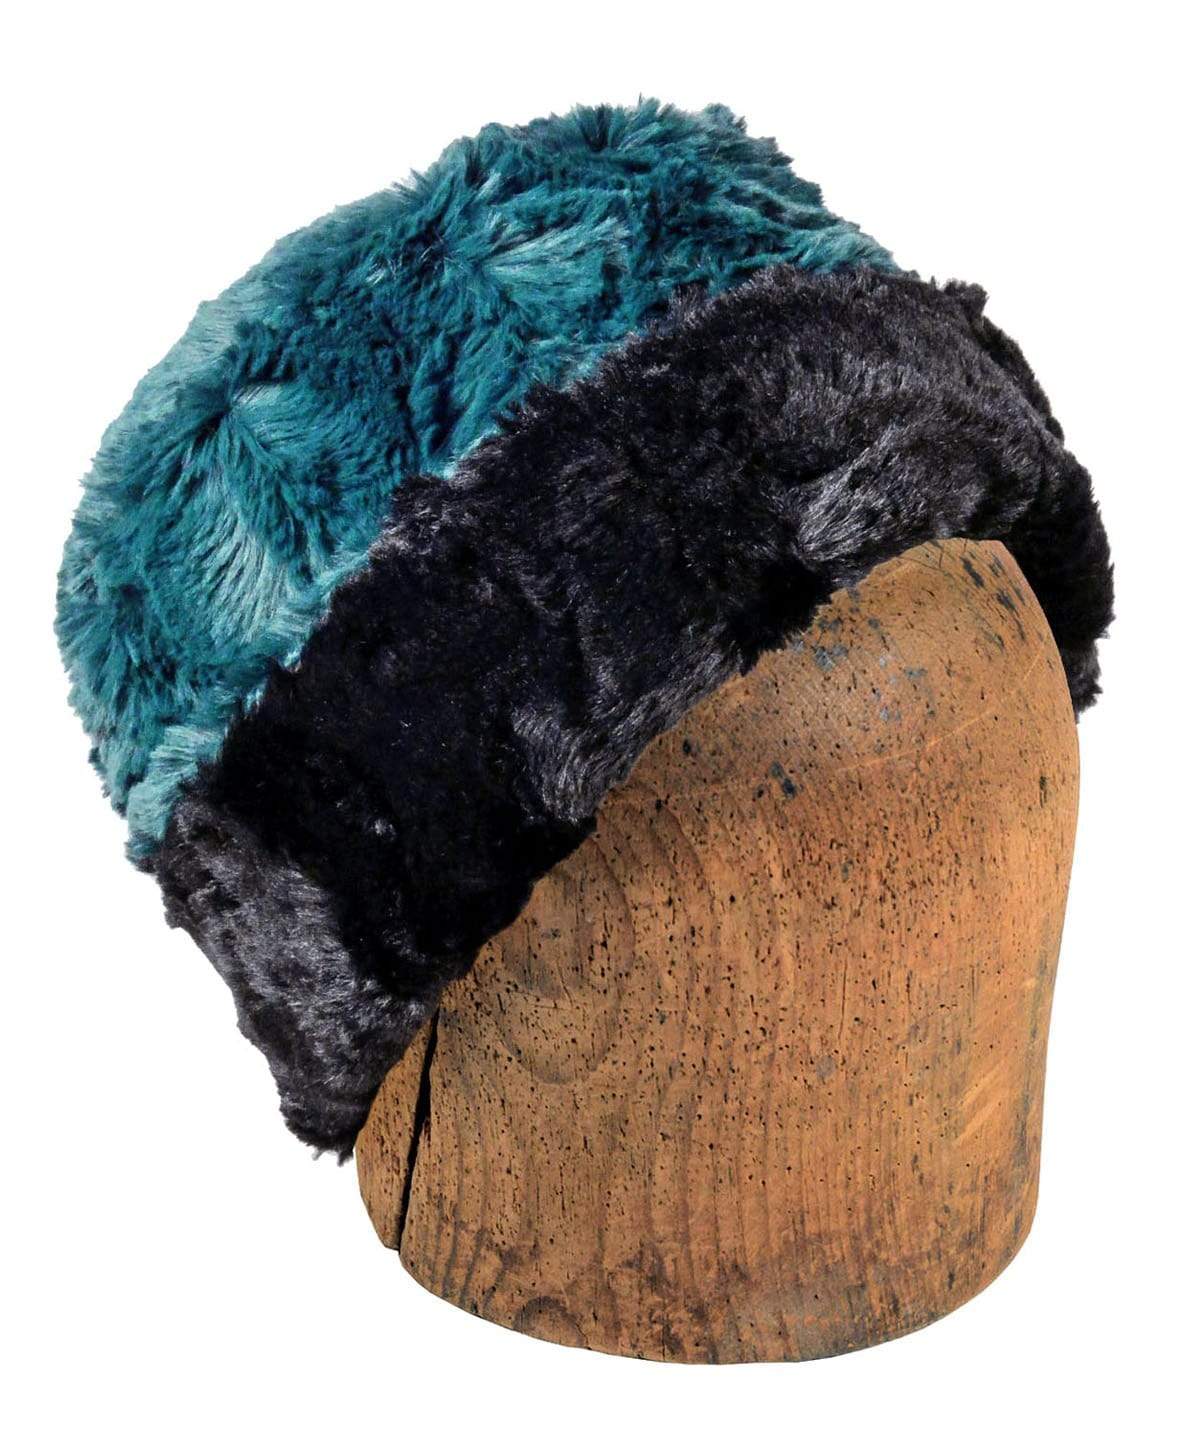 Men's Cuffed Pillbox Solid | Peacock Pond Teal Faux Fur | Handmade in Seattle WA | By Pandemonium Seattle